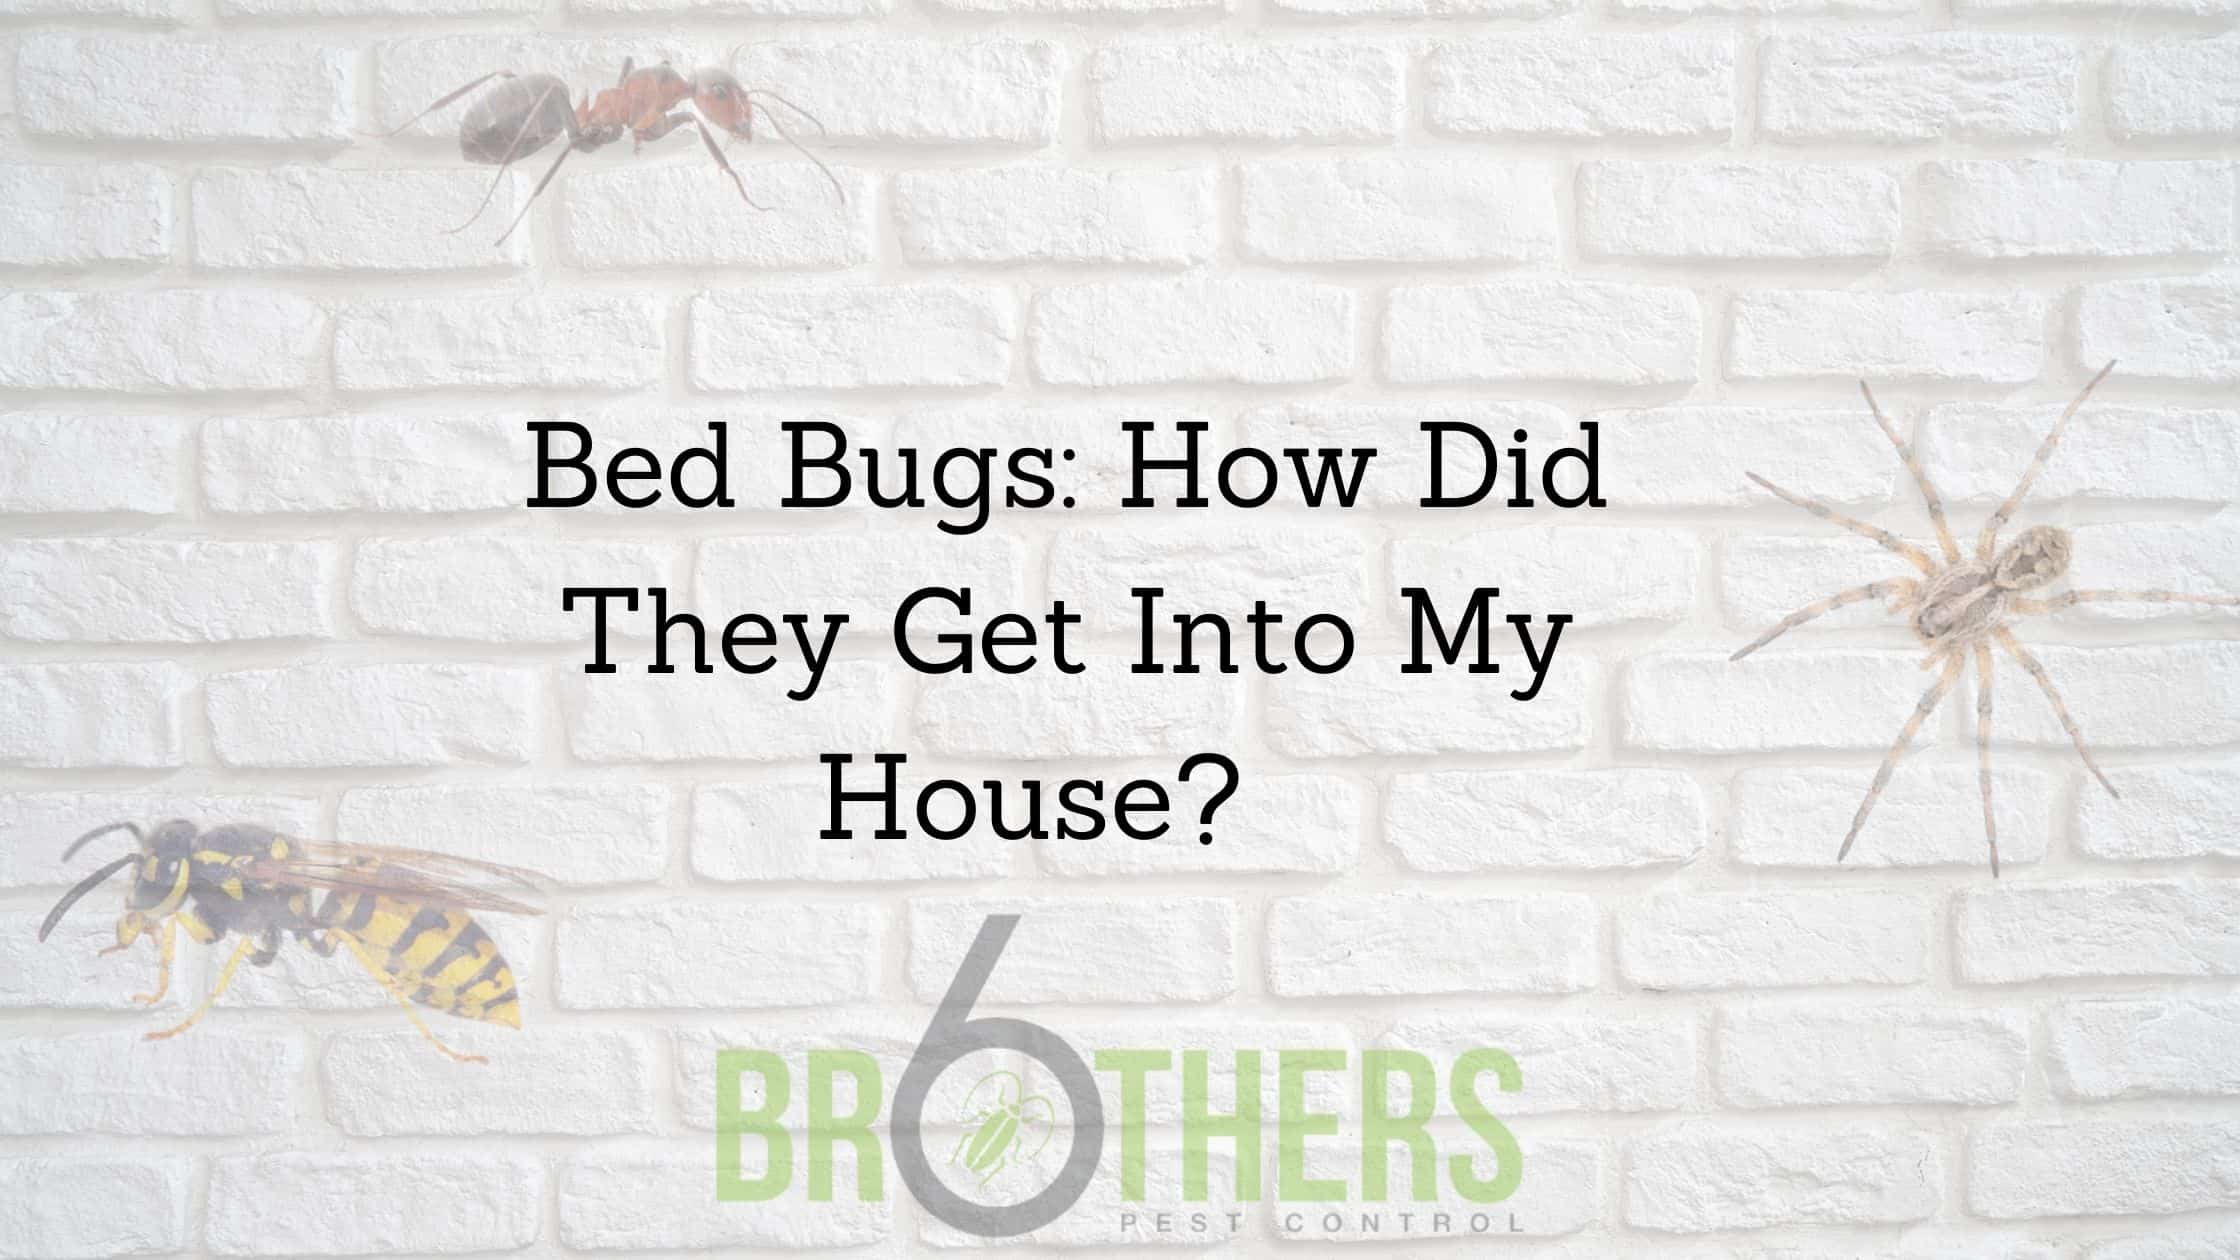 Bed Bugs: How Did They Get Into My House?